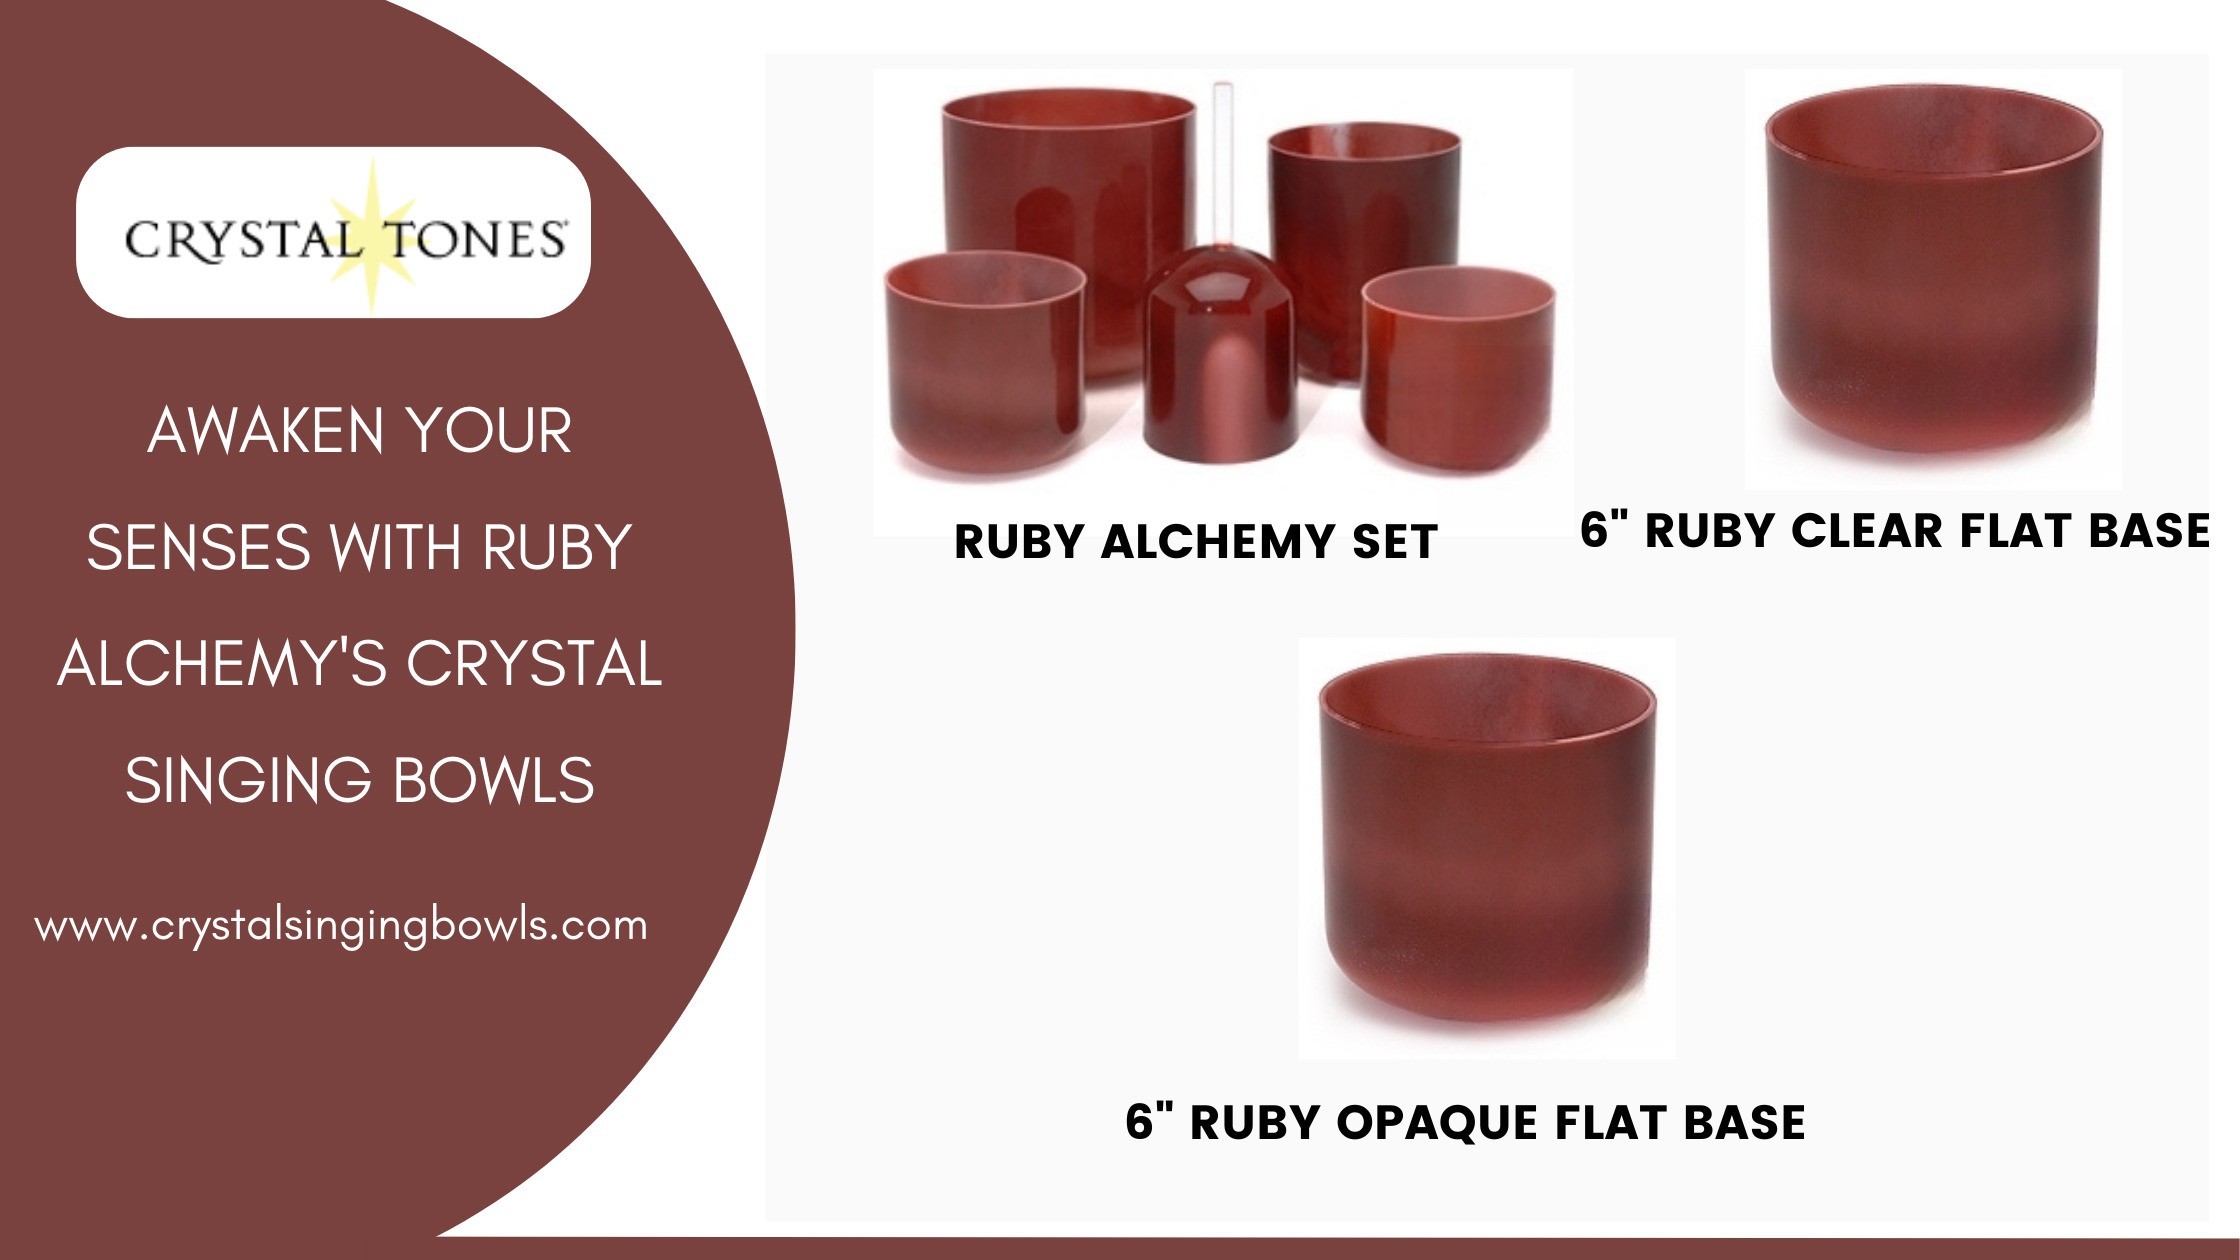 Experience Crystal Healing with Ruby Alchemy